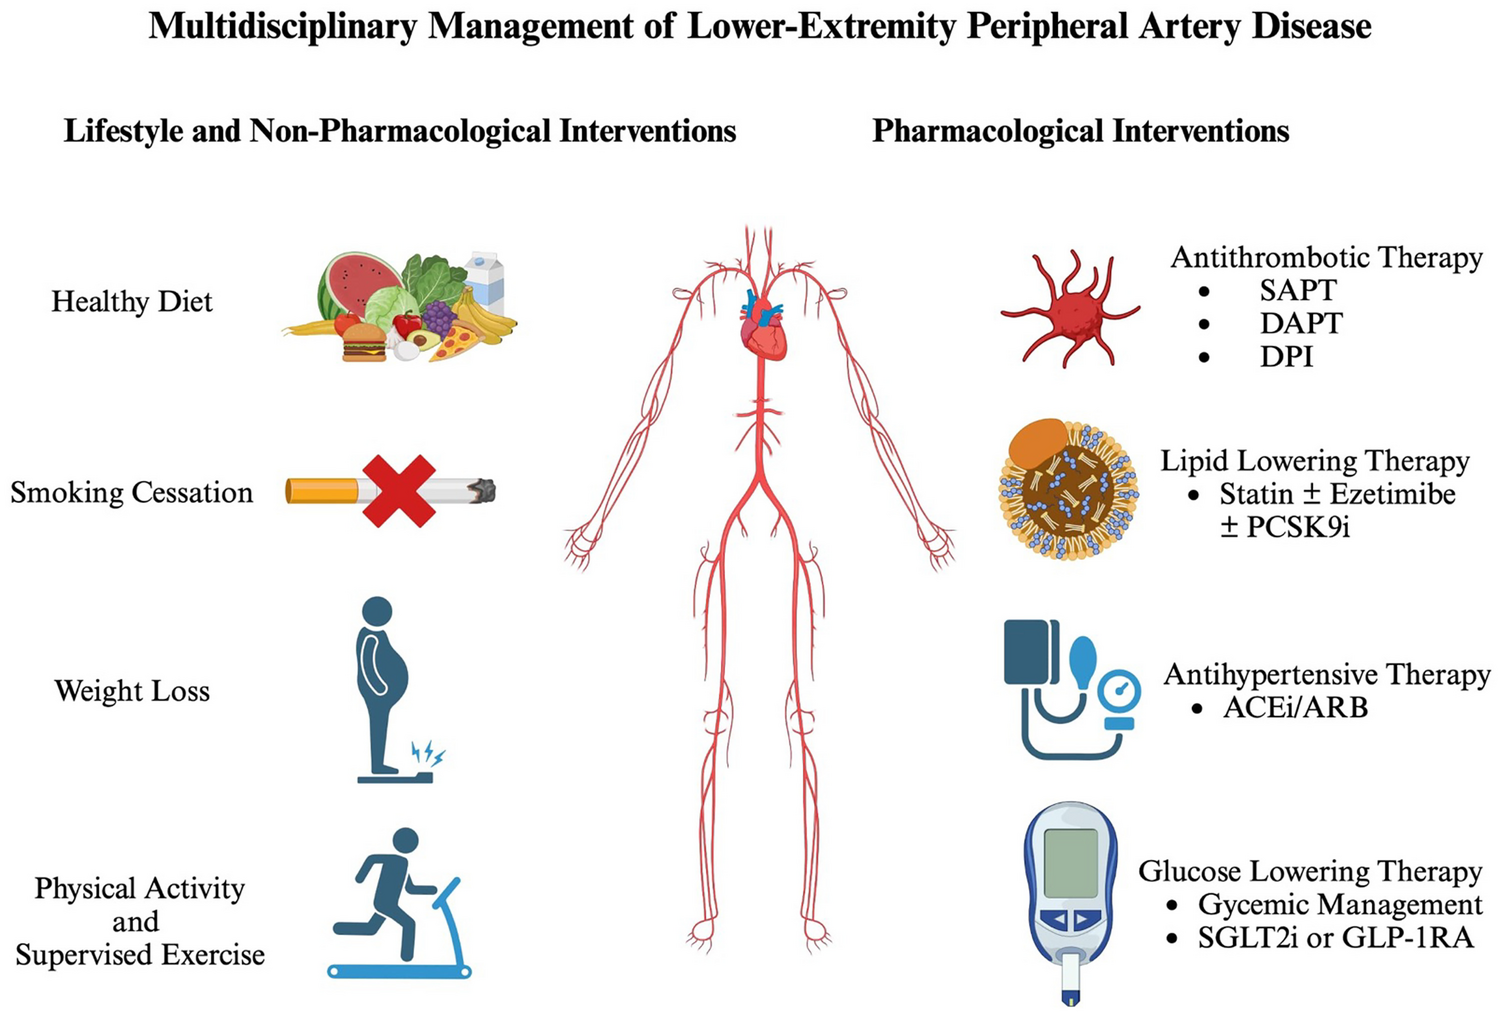 Medical Therapy for Peripheral Artery Disease